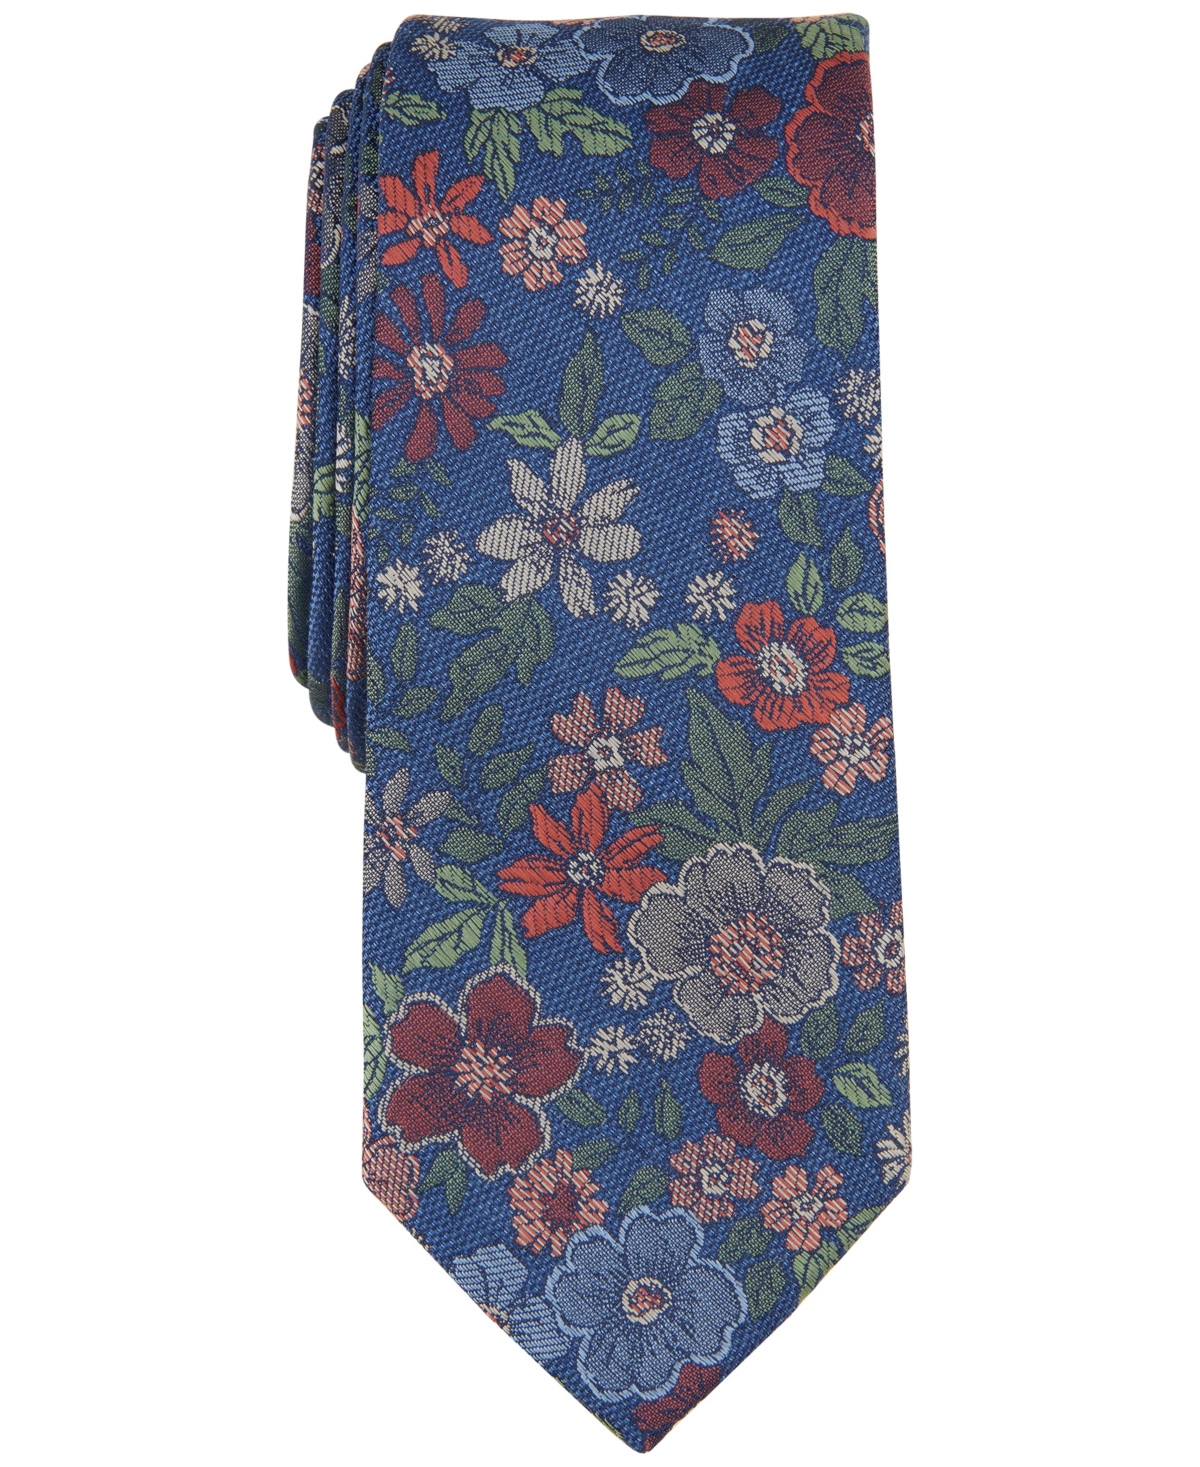 Men's Bloom Floral Tie, Created for Macy's - Peach